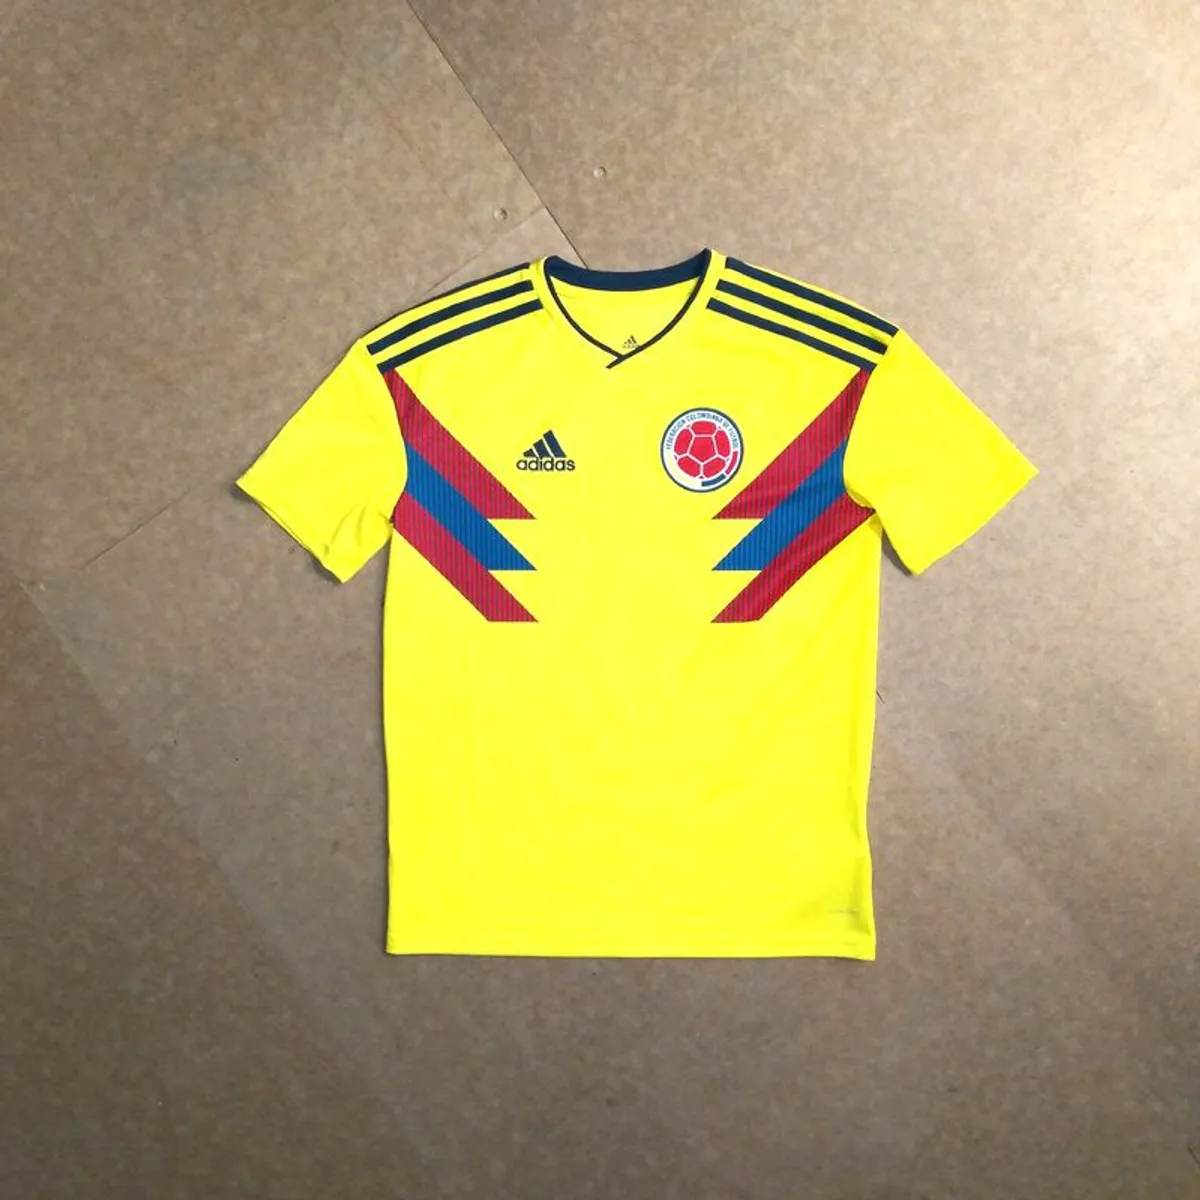 FREE POST Colombia Jersey adidas Shirt World Cup Football Soccer Yellow Boys Girls Youths Childs Childrens - Image 1